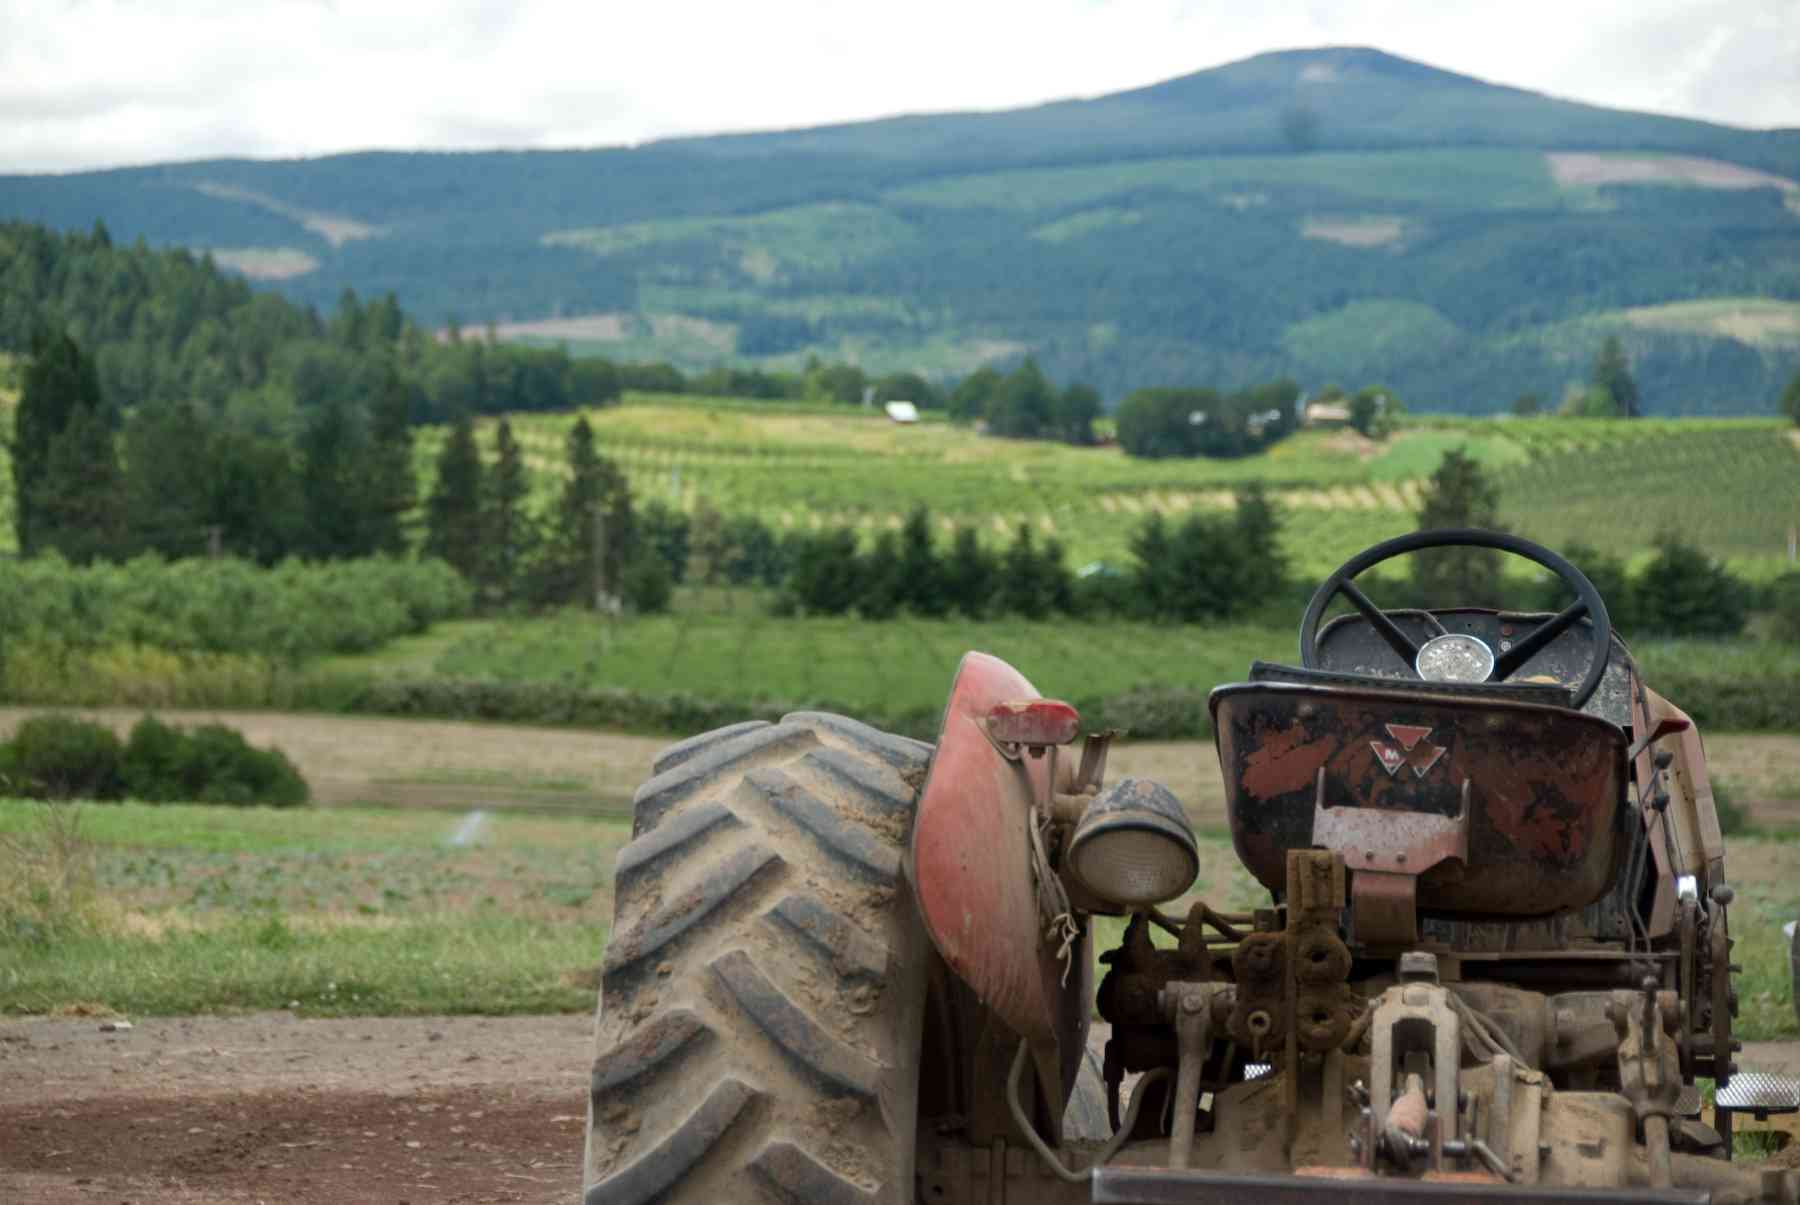 A tractor in front of a hilly landscape